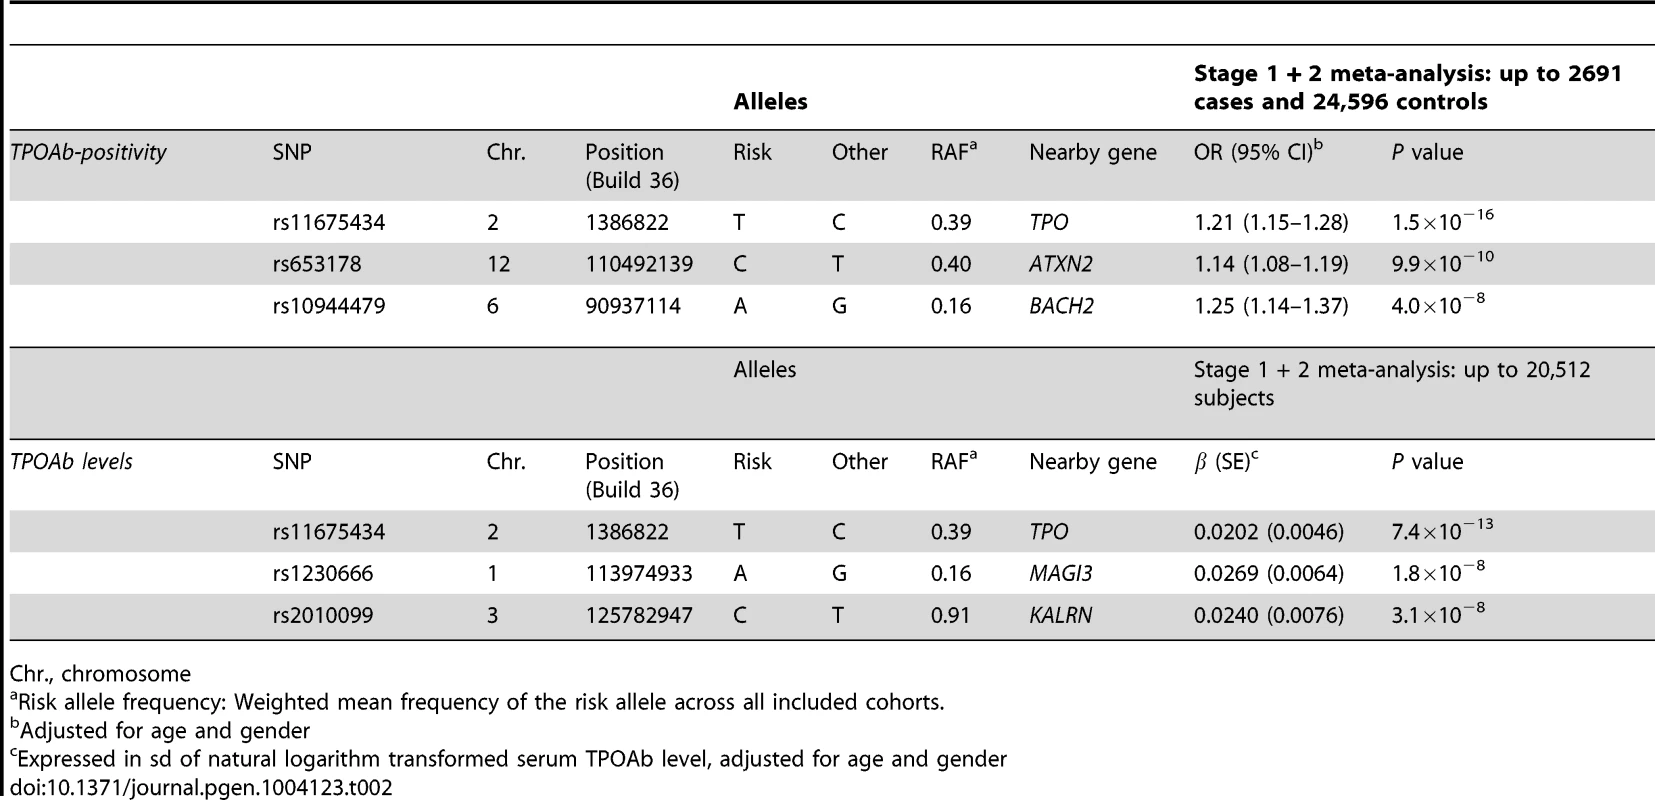 Newly identified loci associated with TPOAb-positivity and/or serum TPOAb levels reaching genome wide significance.